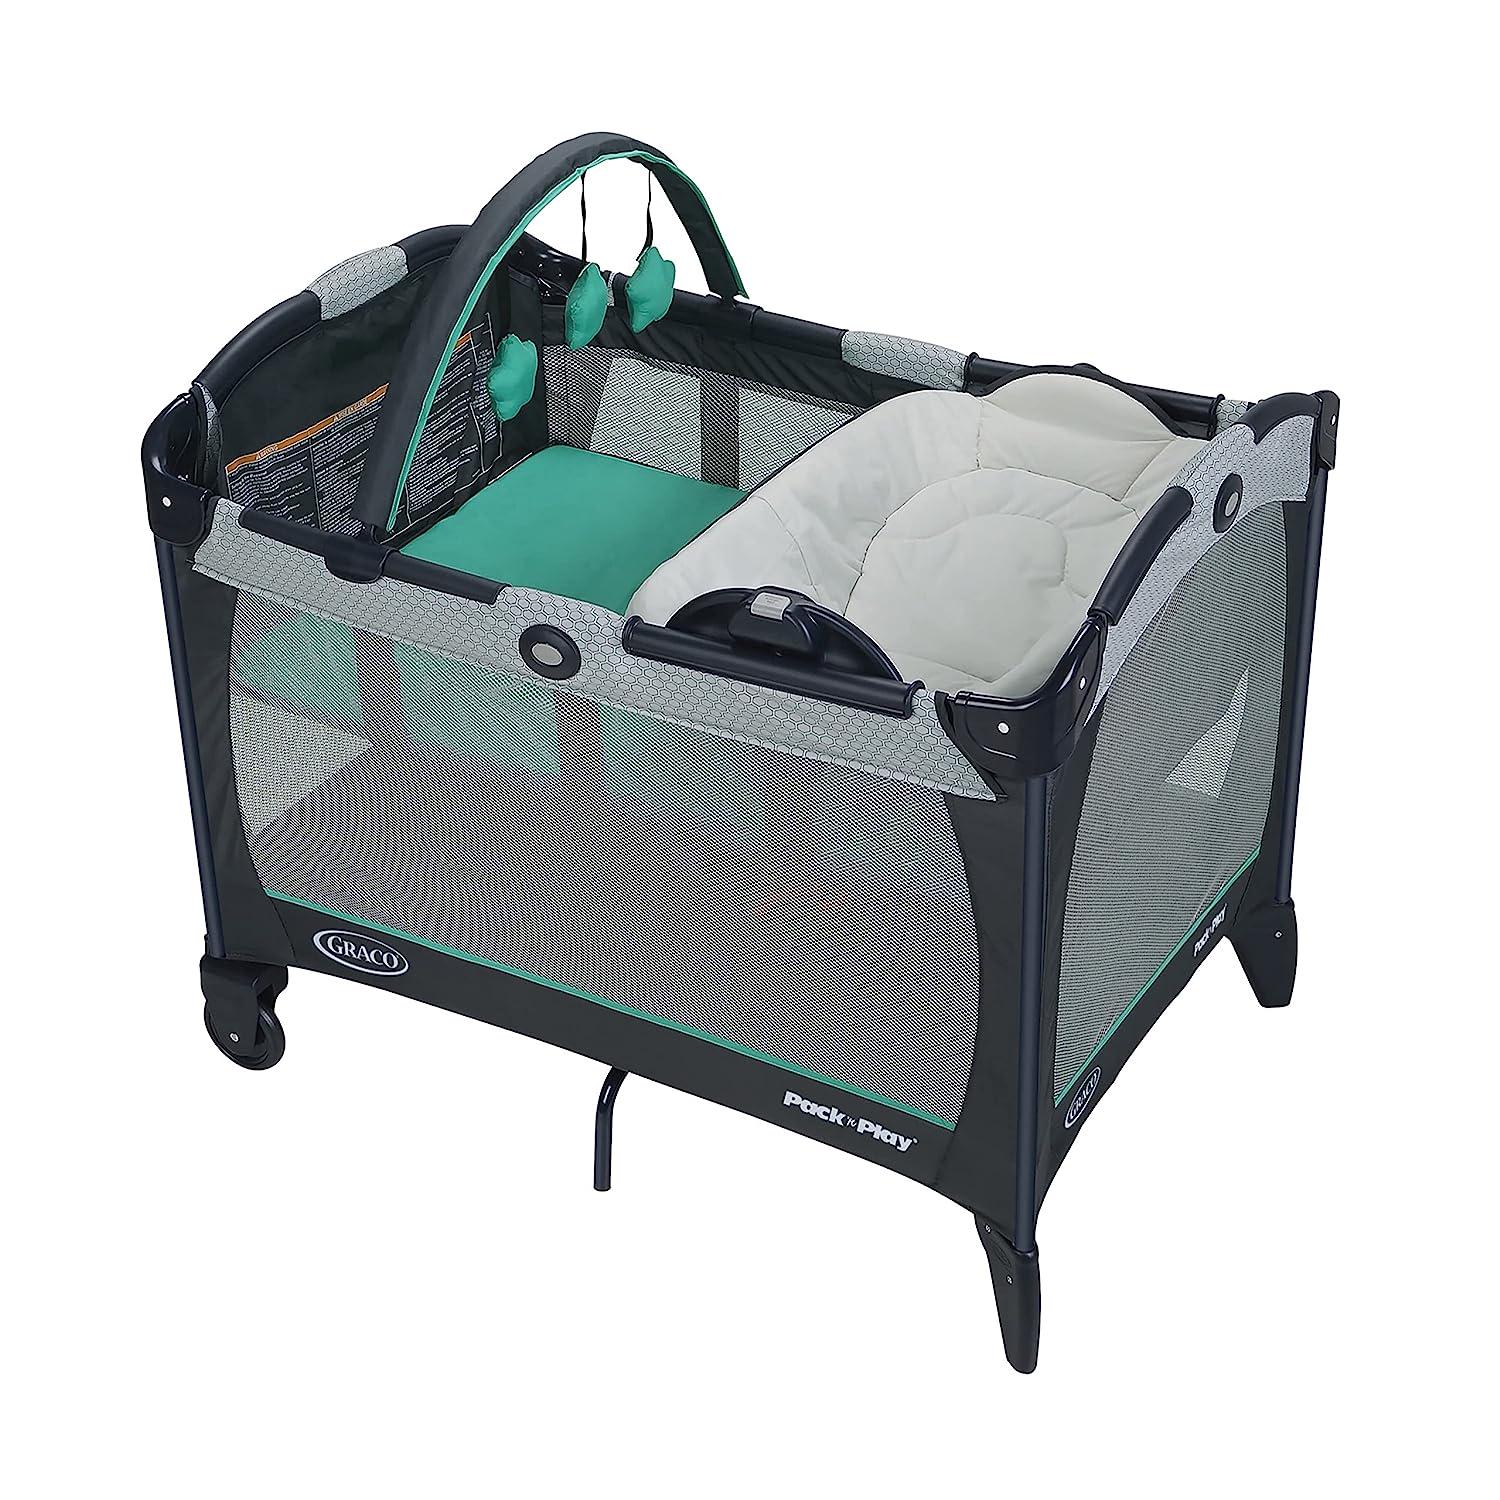 Pack 'n Play Playard with Reversible Seat and Changer LX, Basin-